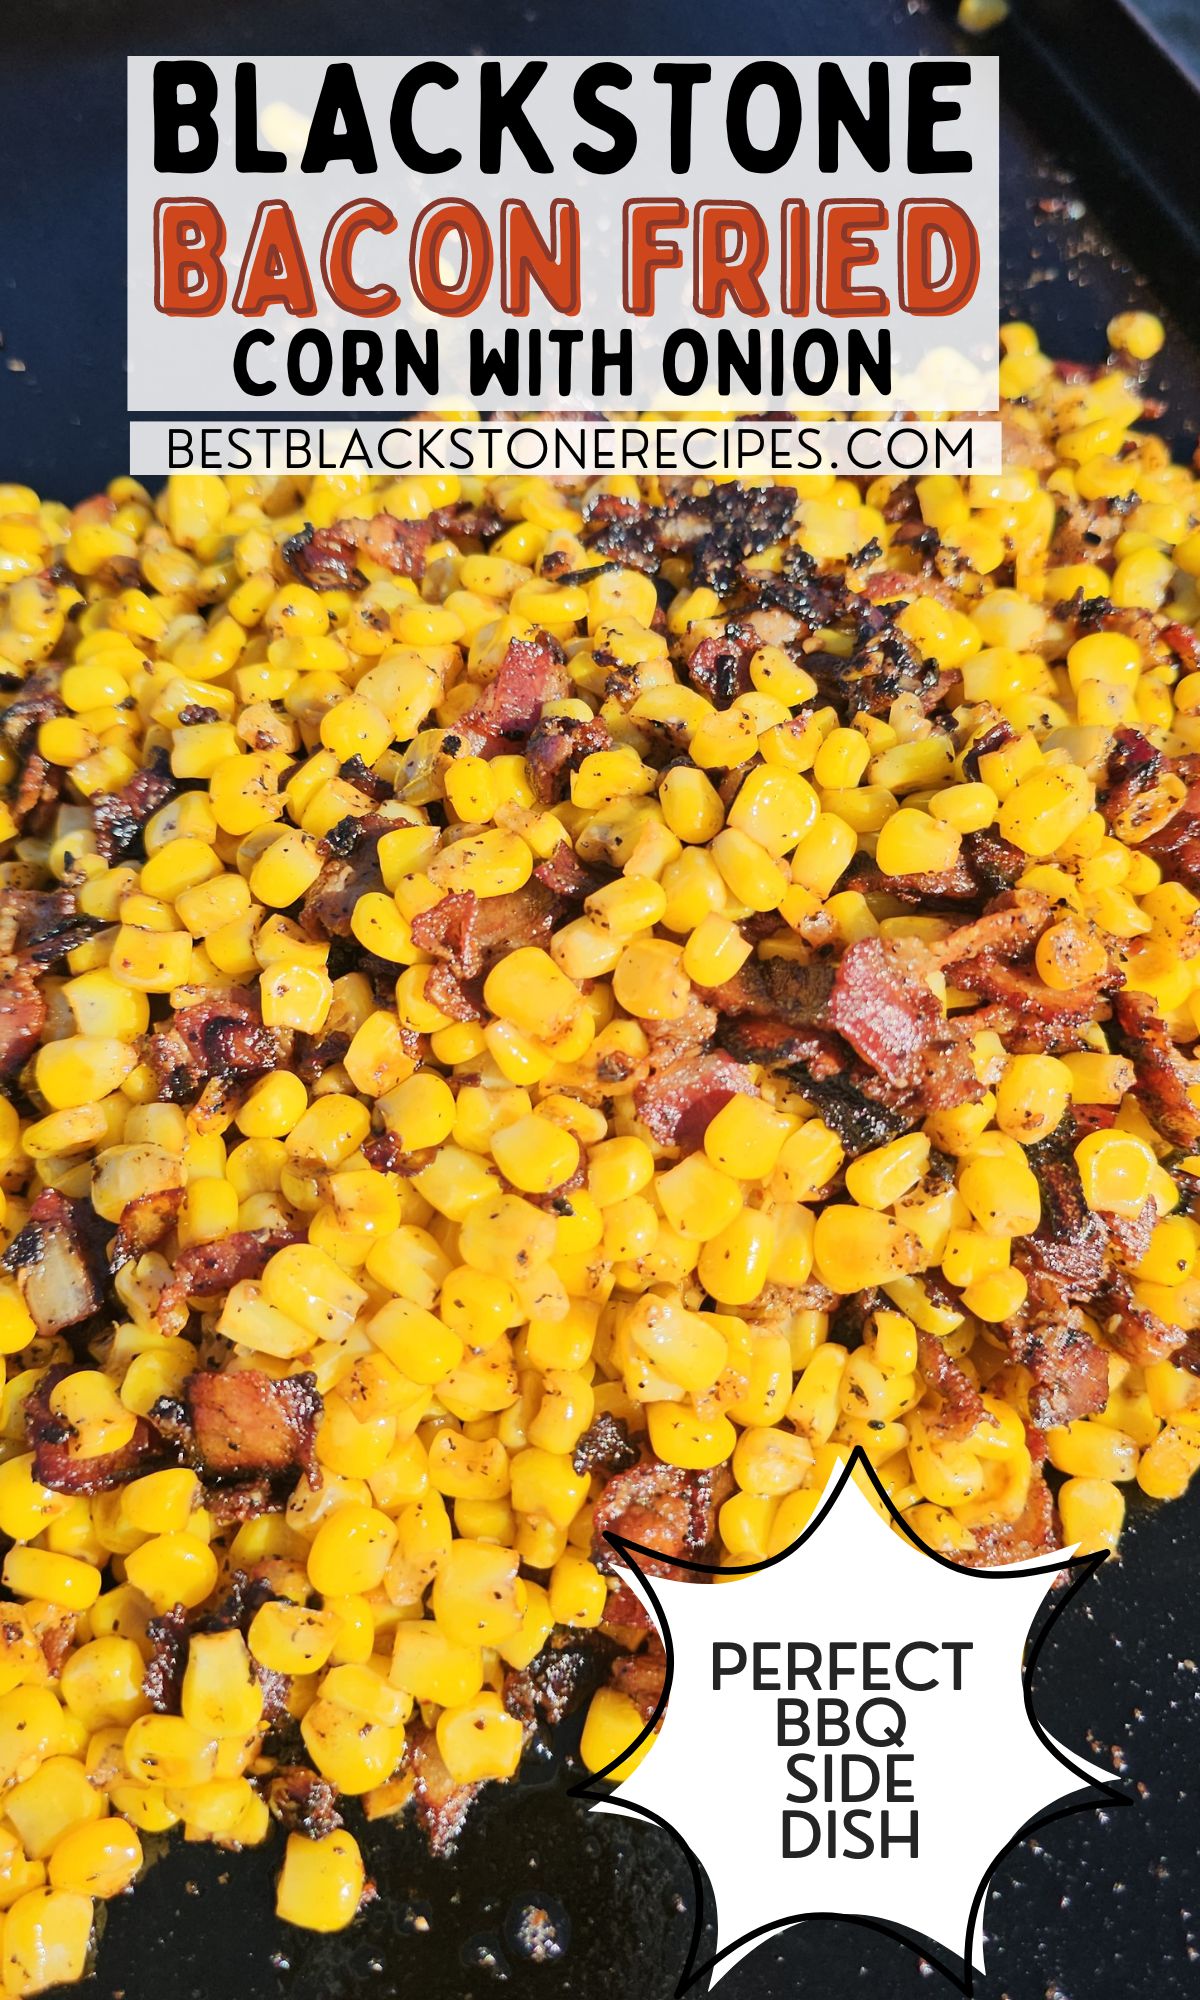 Grilled corn with bacon and onion – a delicious bbq side dish.